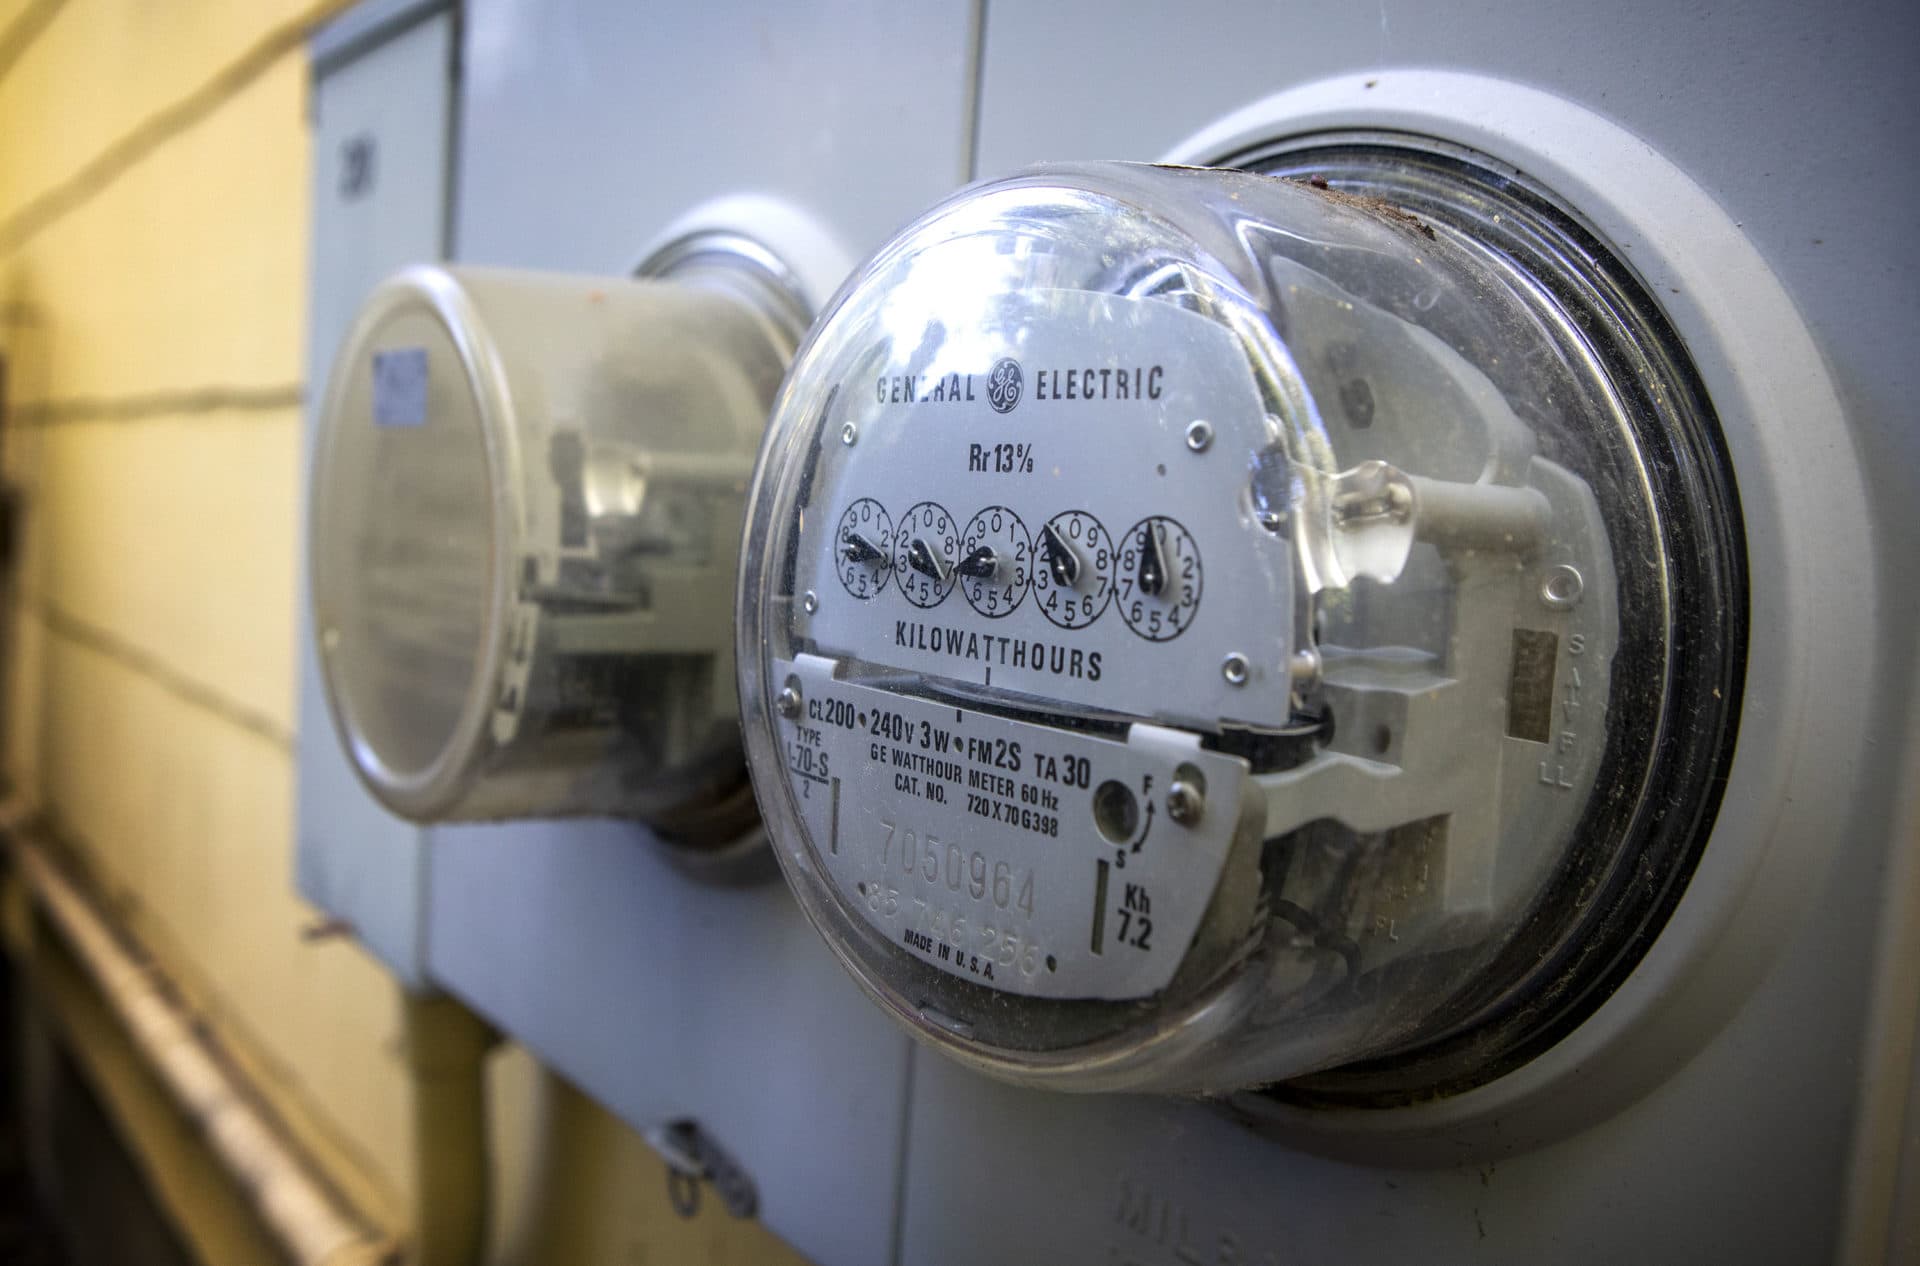 Energy prices are skyrocketing. Here’s how you can get financial help this winter